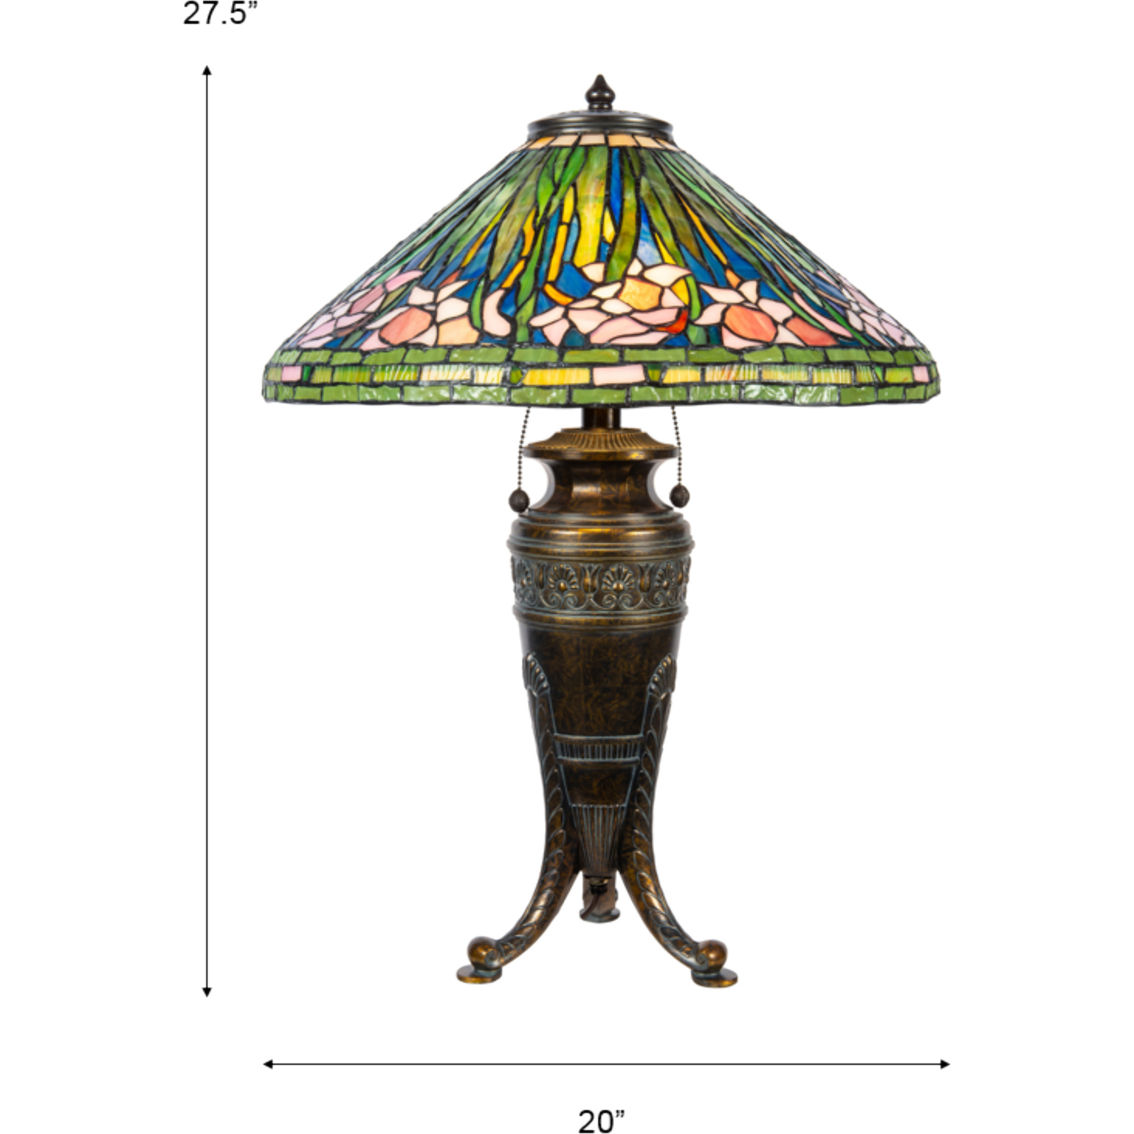 Dale Tiffany 27.5 in. Tall Pink Glades Table Lamp - Image 6 of 6